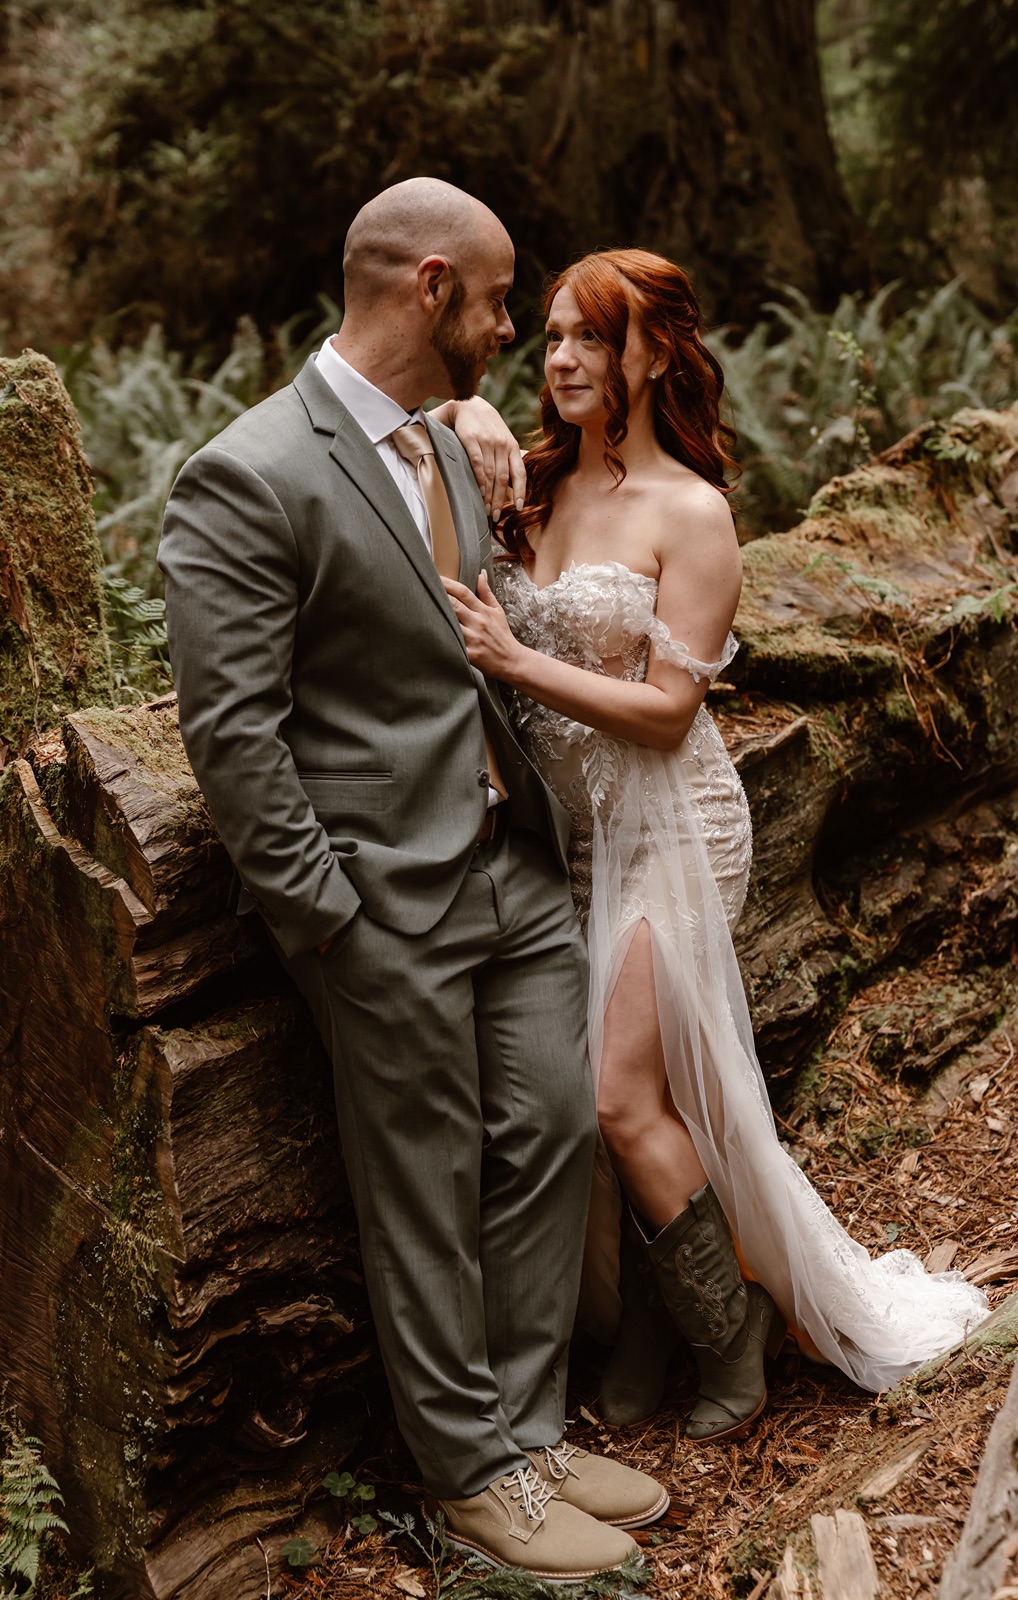 Bride and groom look lovingly at each other during their elopement in Fern Canyon